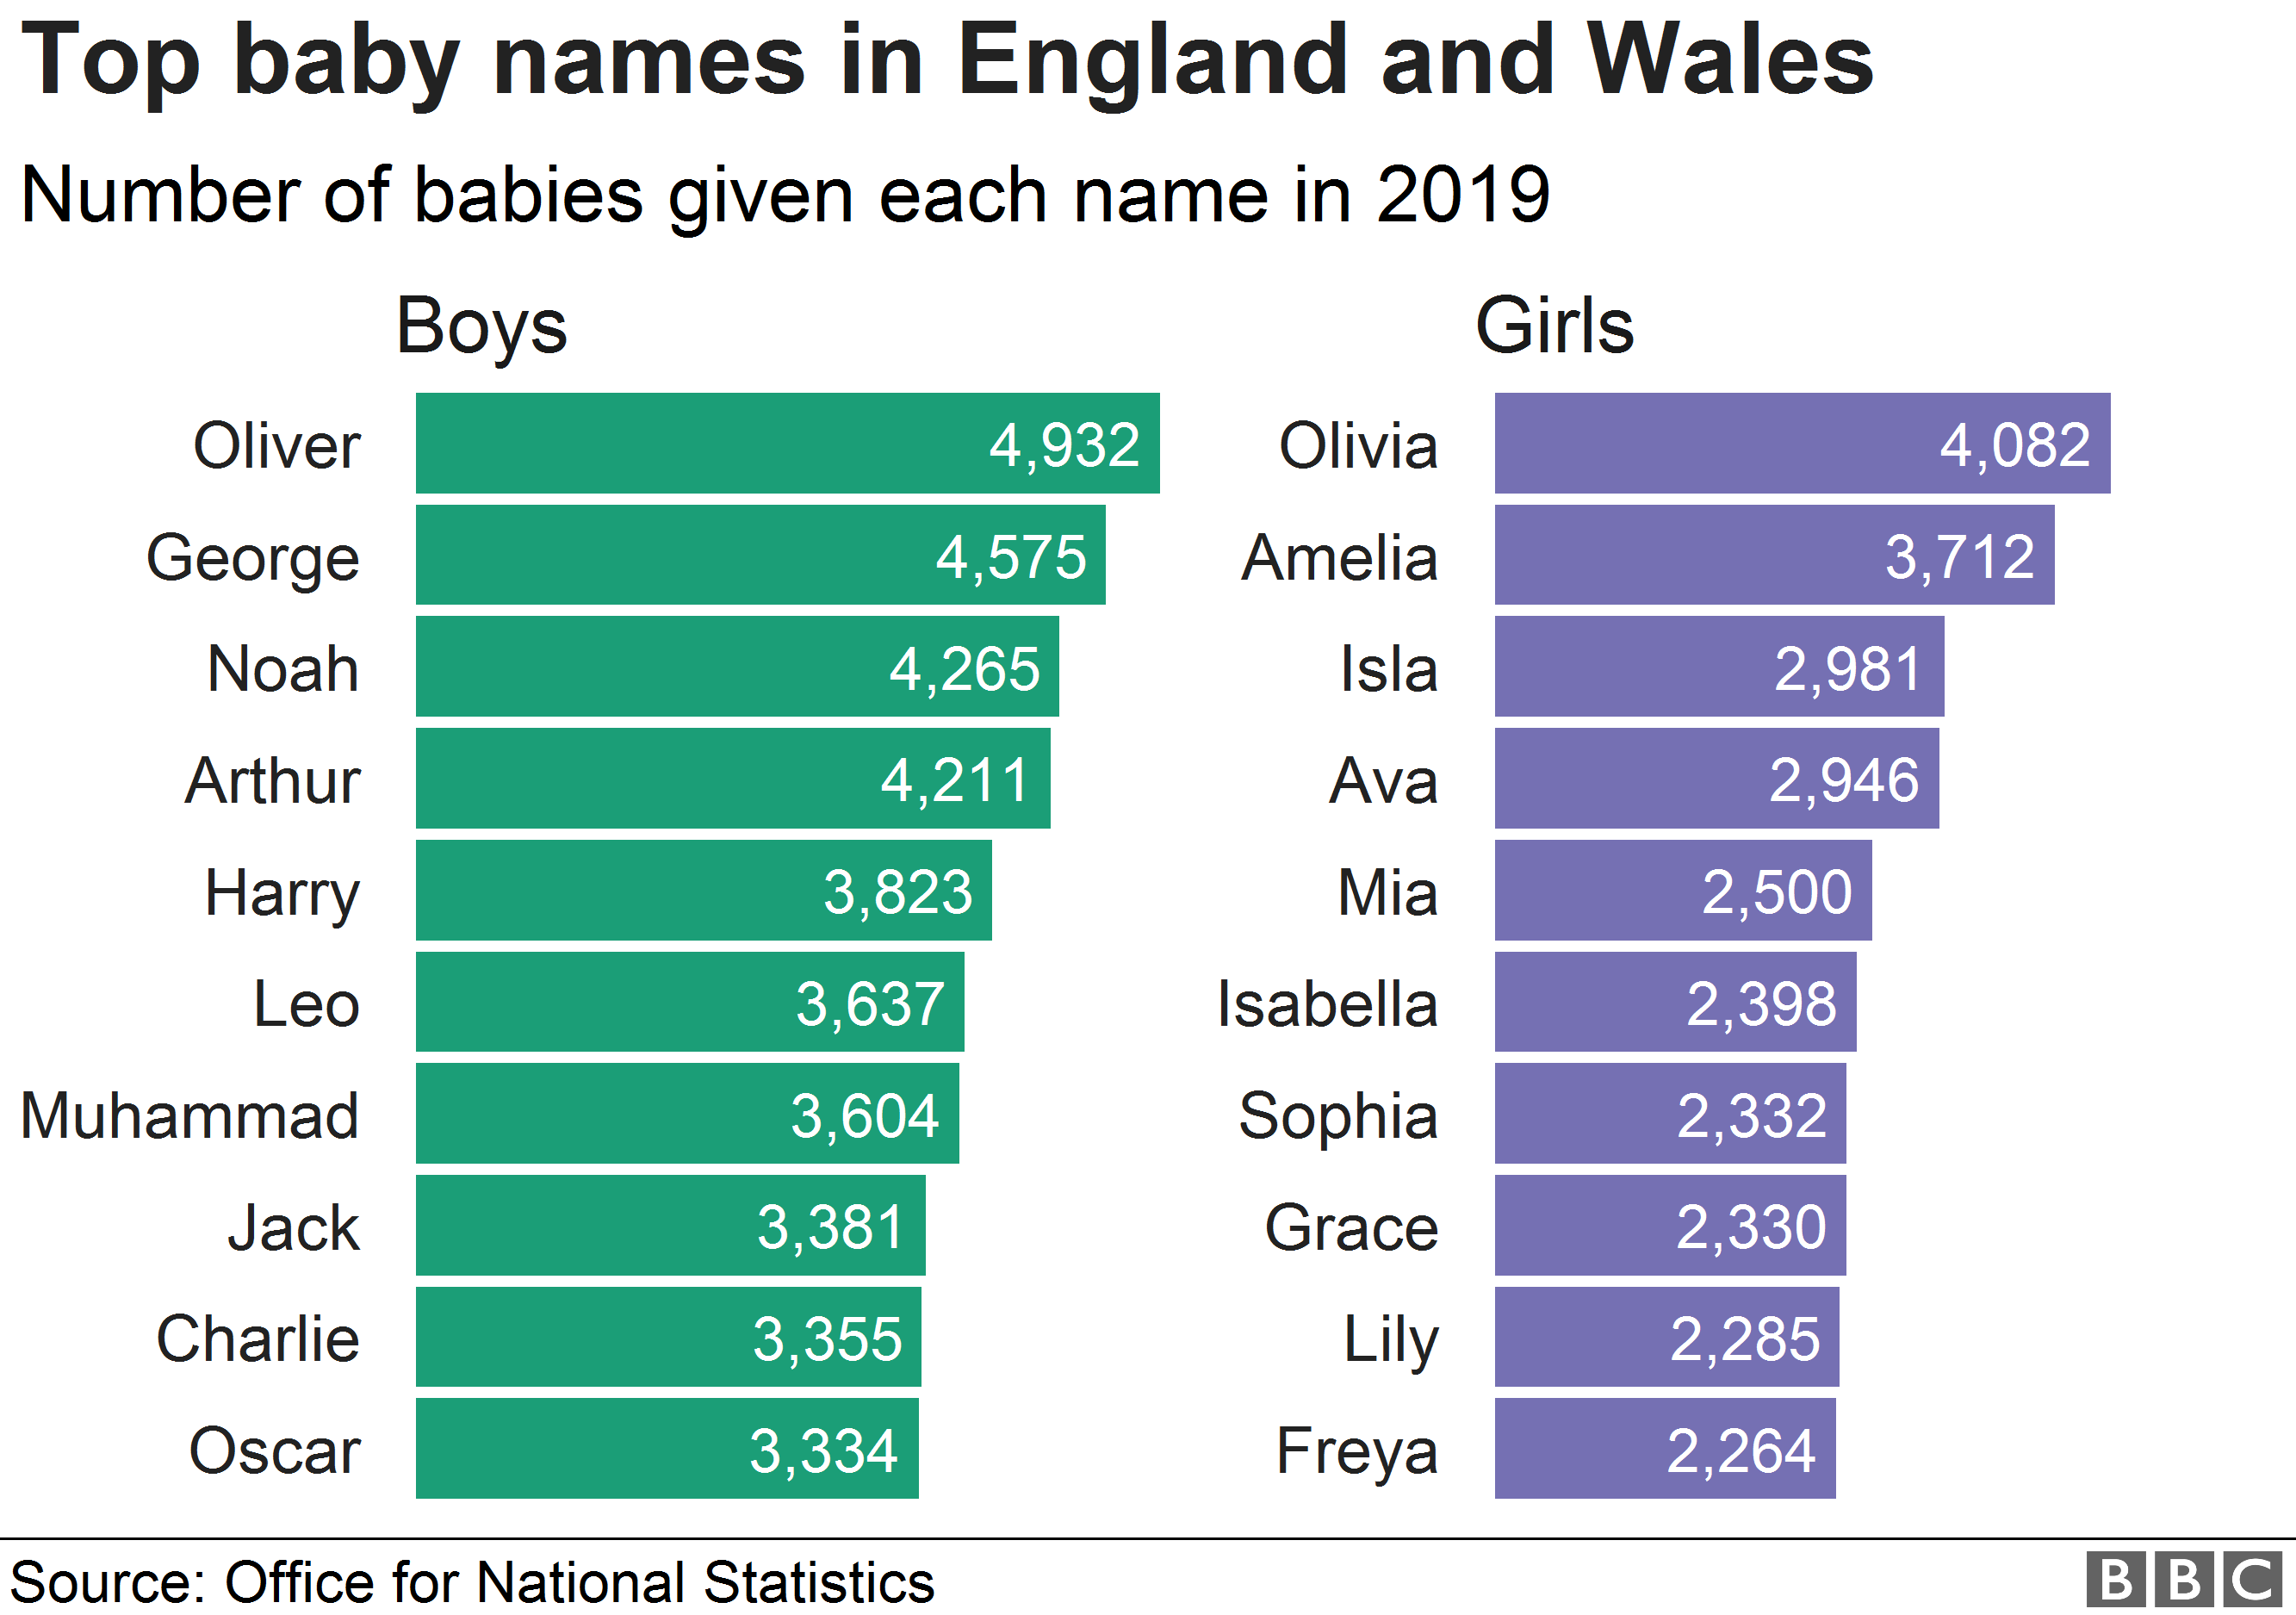 Chart showing top 10 baby names for boys and girls